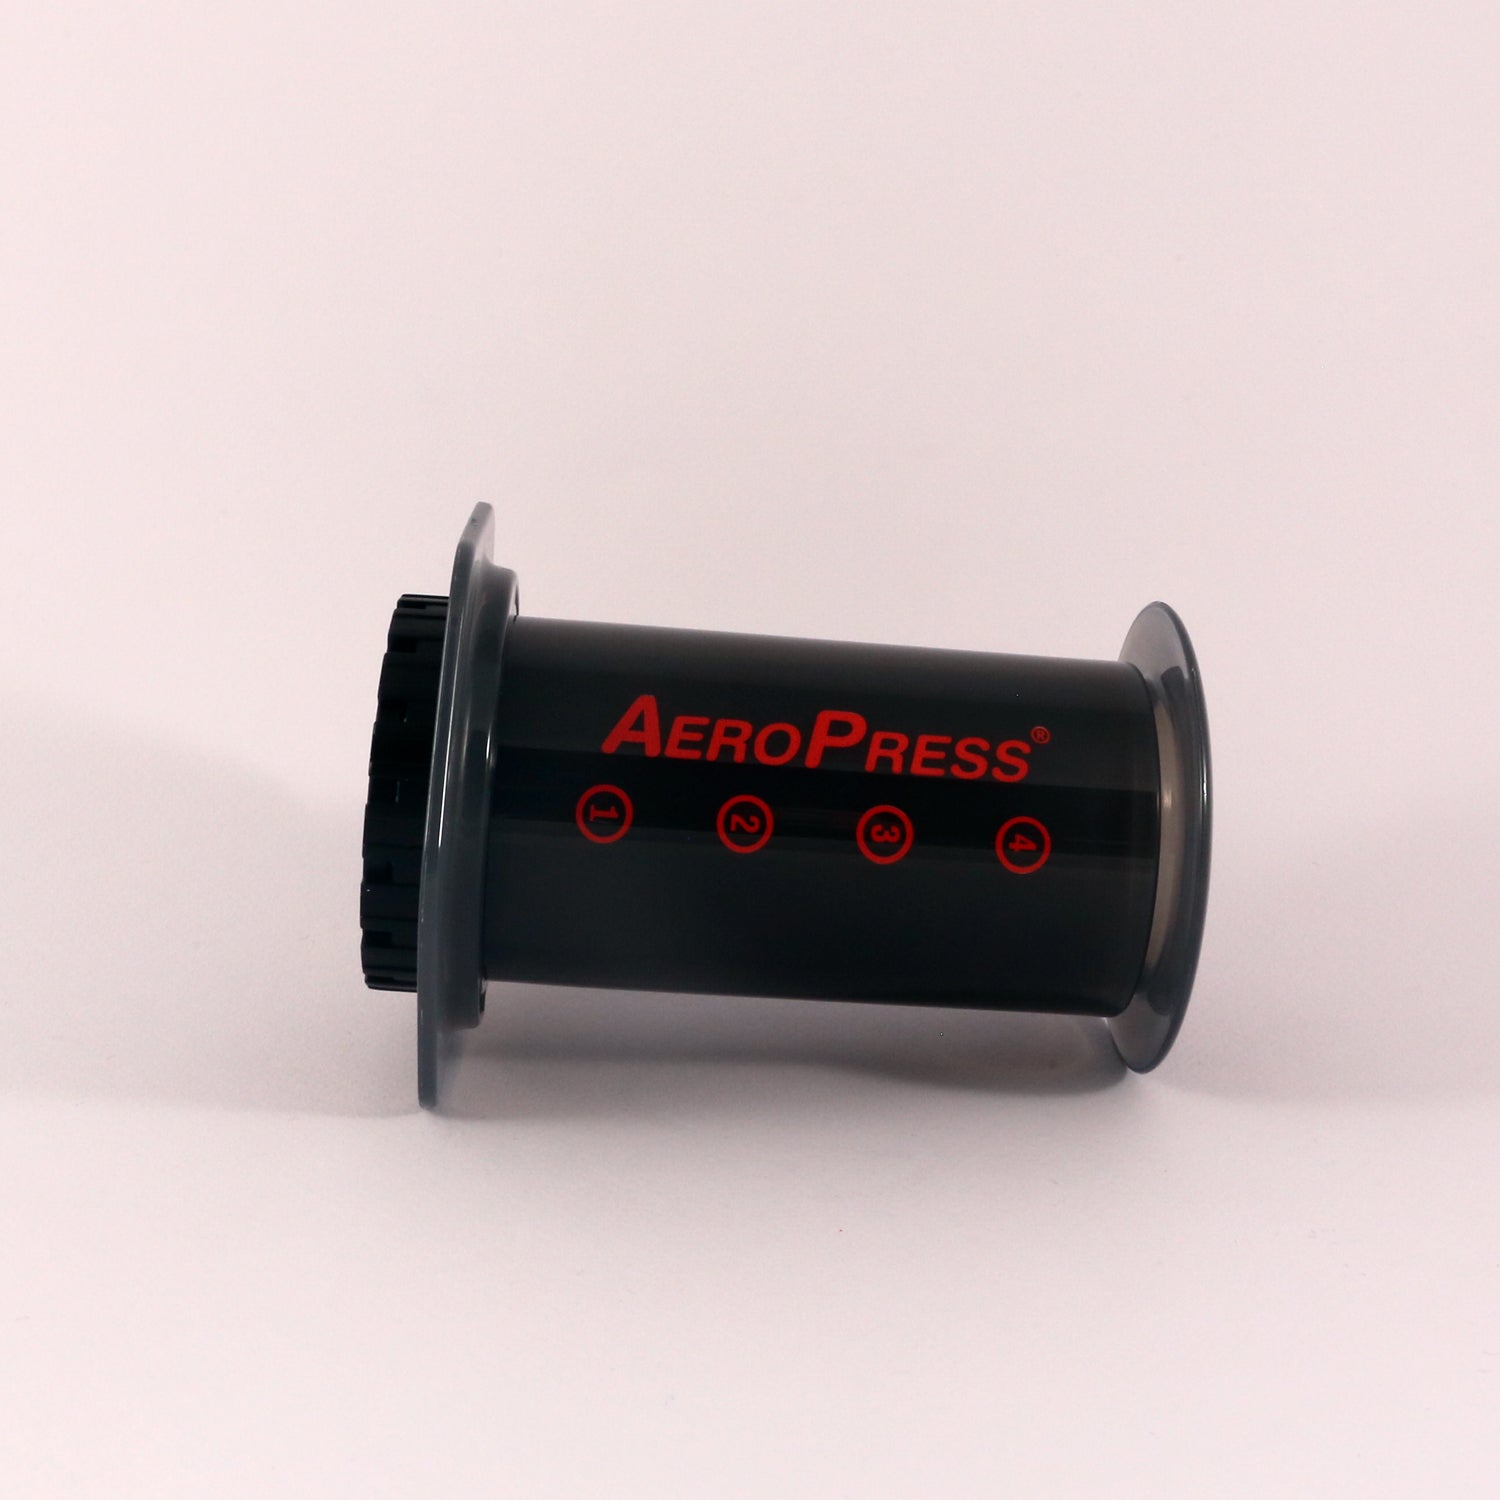 An Tandem Aeropress coffee maker, branded as the world's greatest, on a gray background. It features a black cylindrical body adorned with the logo and measurement markers in red and is assembled and ready for.